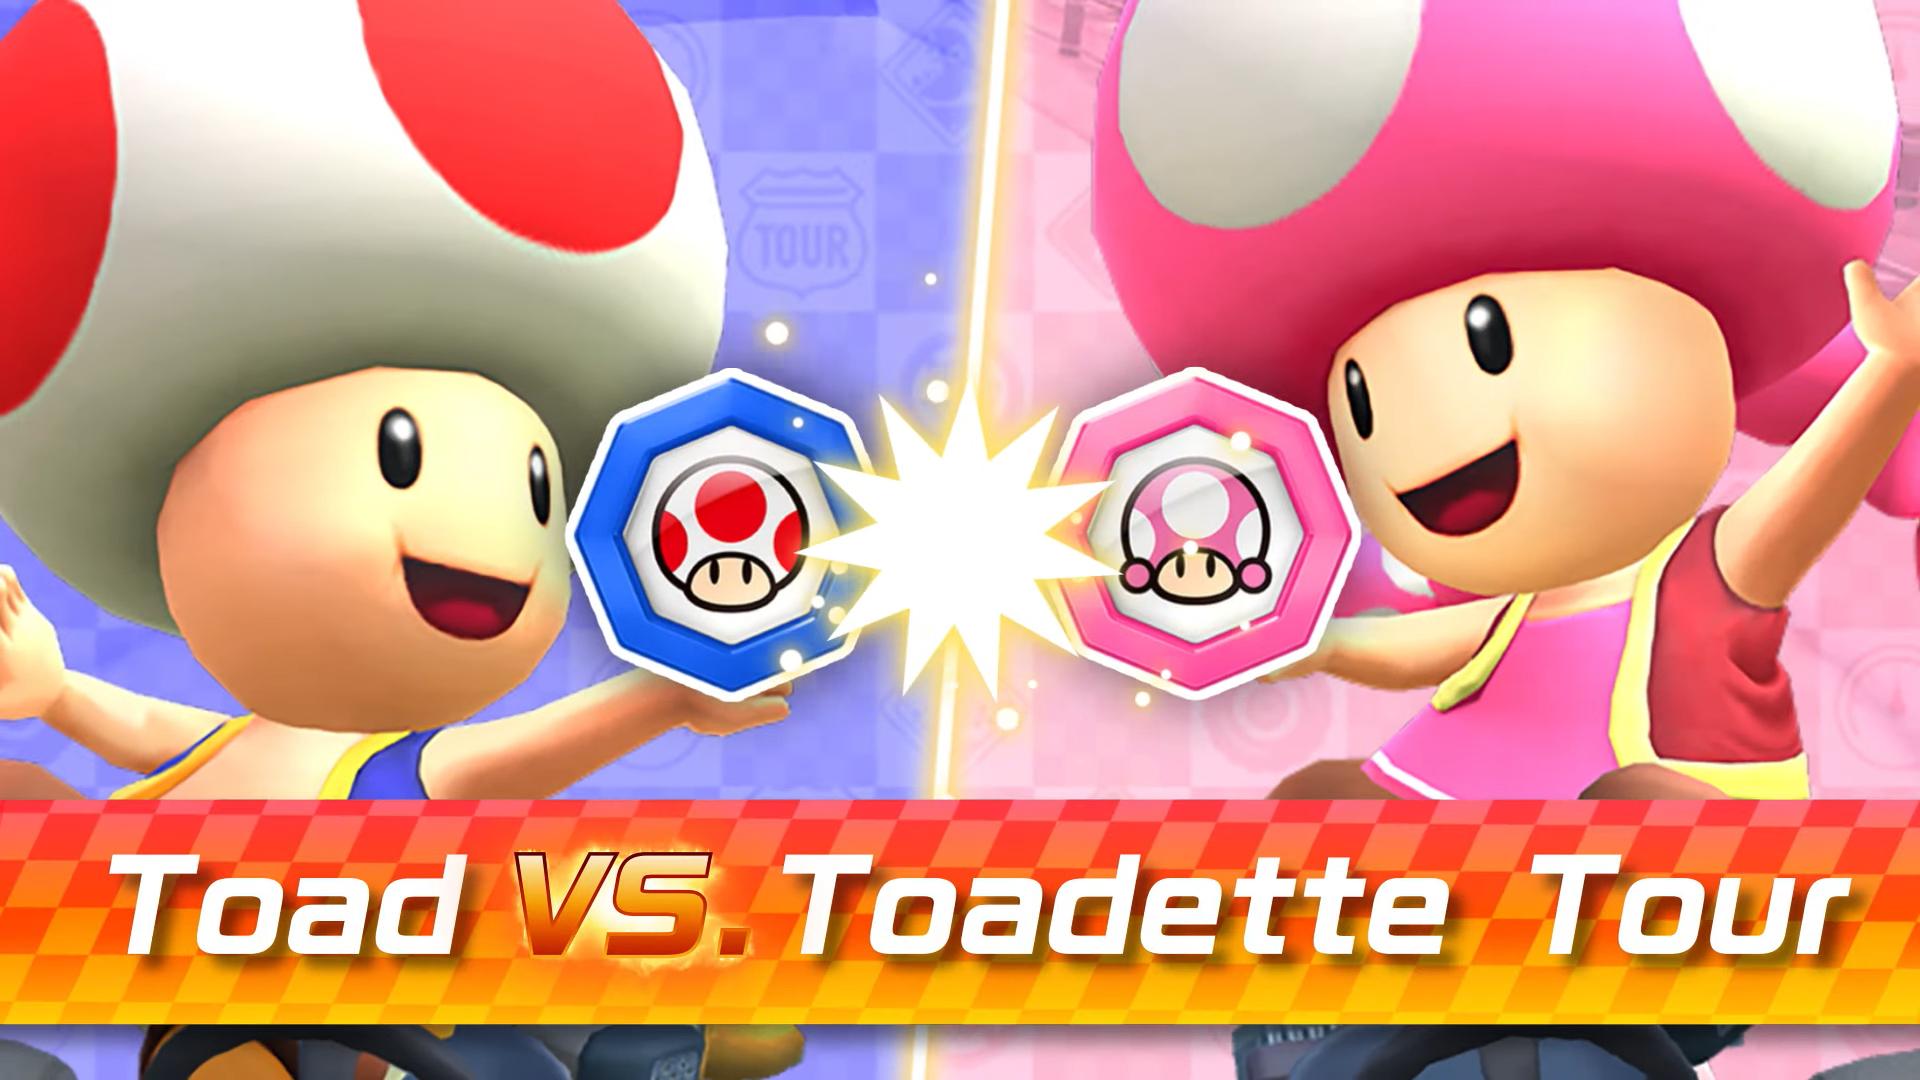 Toadette Wallpapers Top Free Toadette Backgrounds Wallpaperaccess 3757